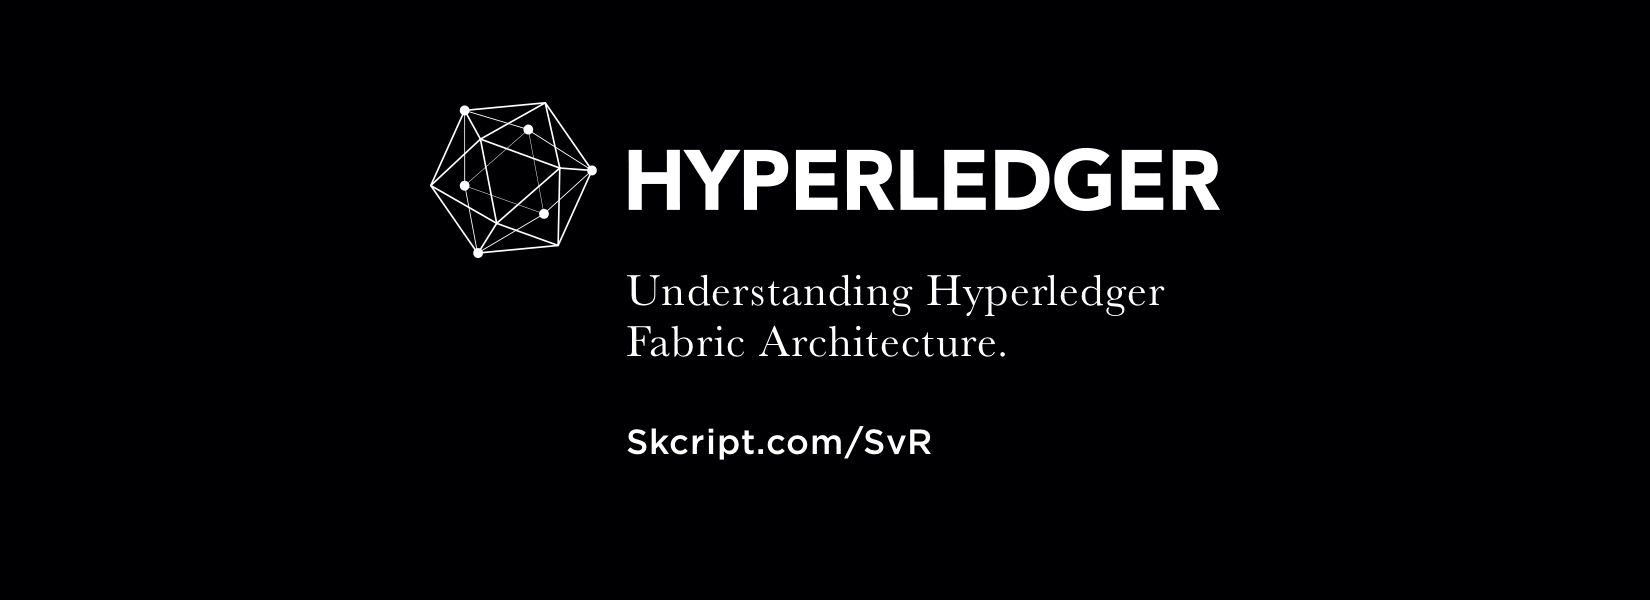 Hyperledger Fabric Architecture: Explained in detail